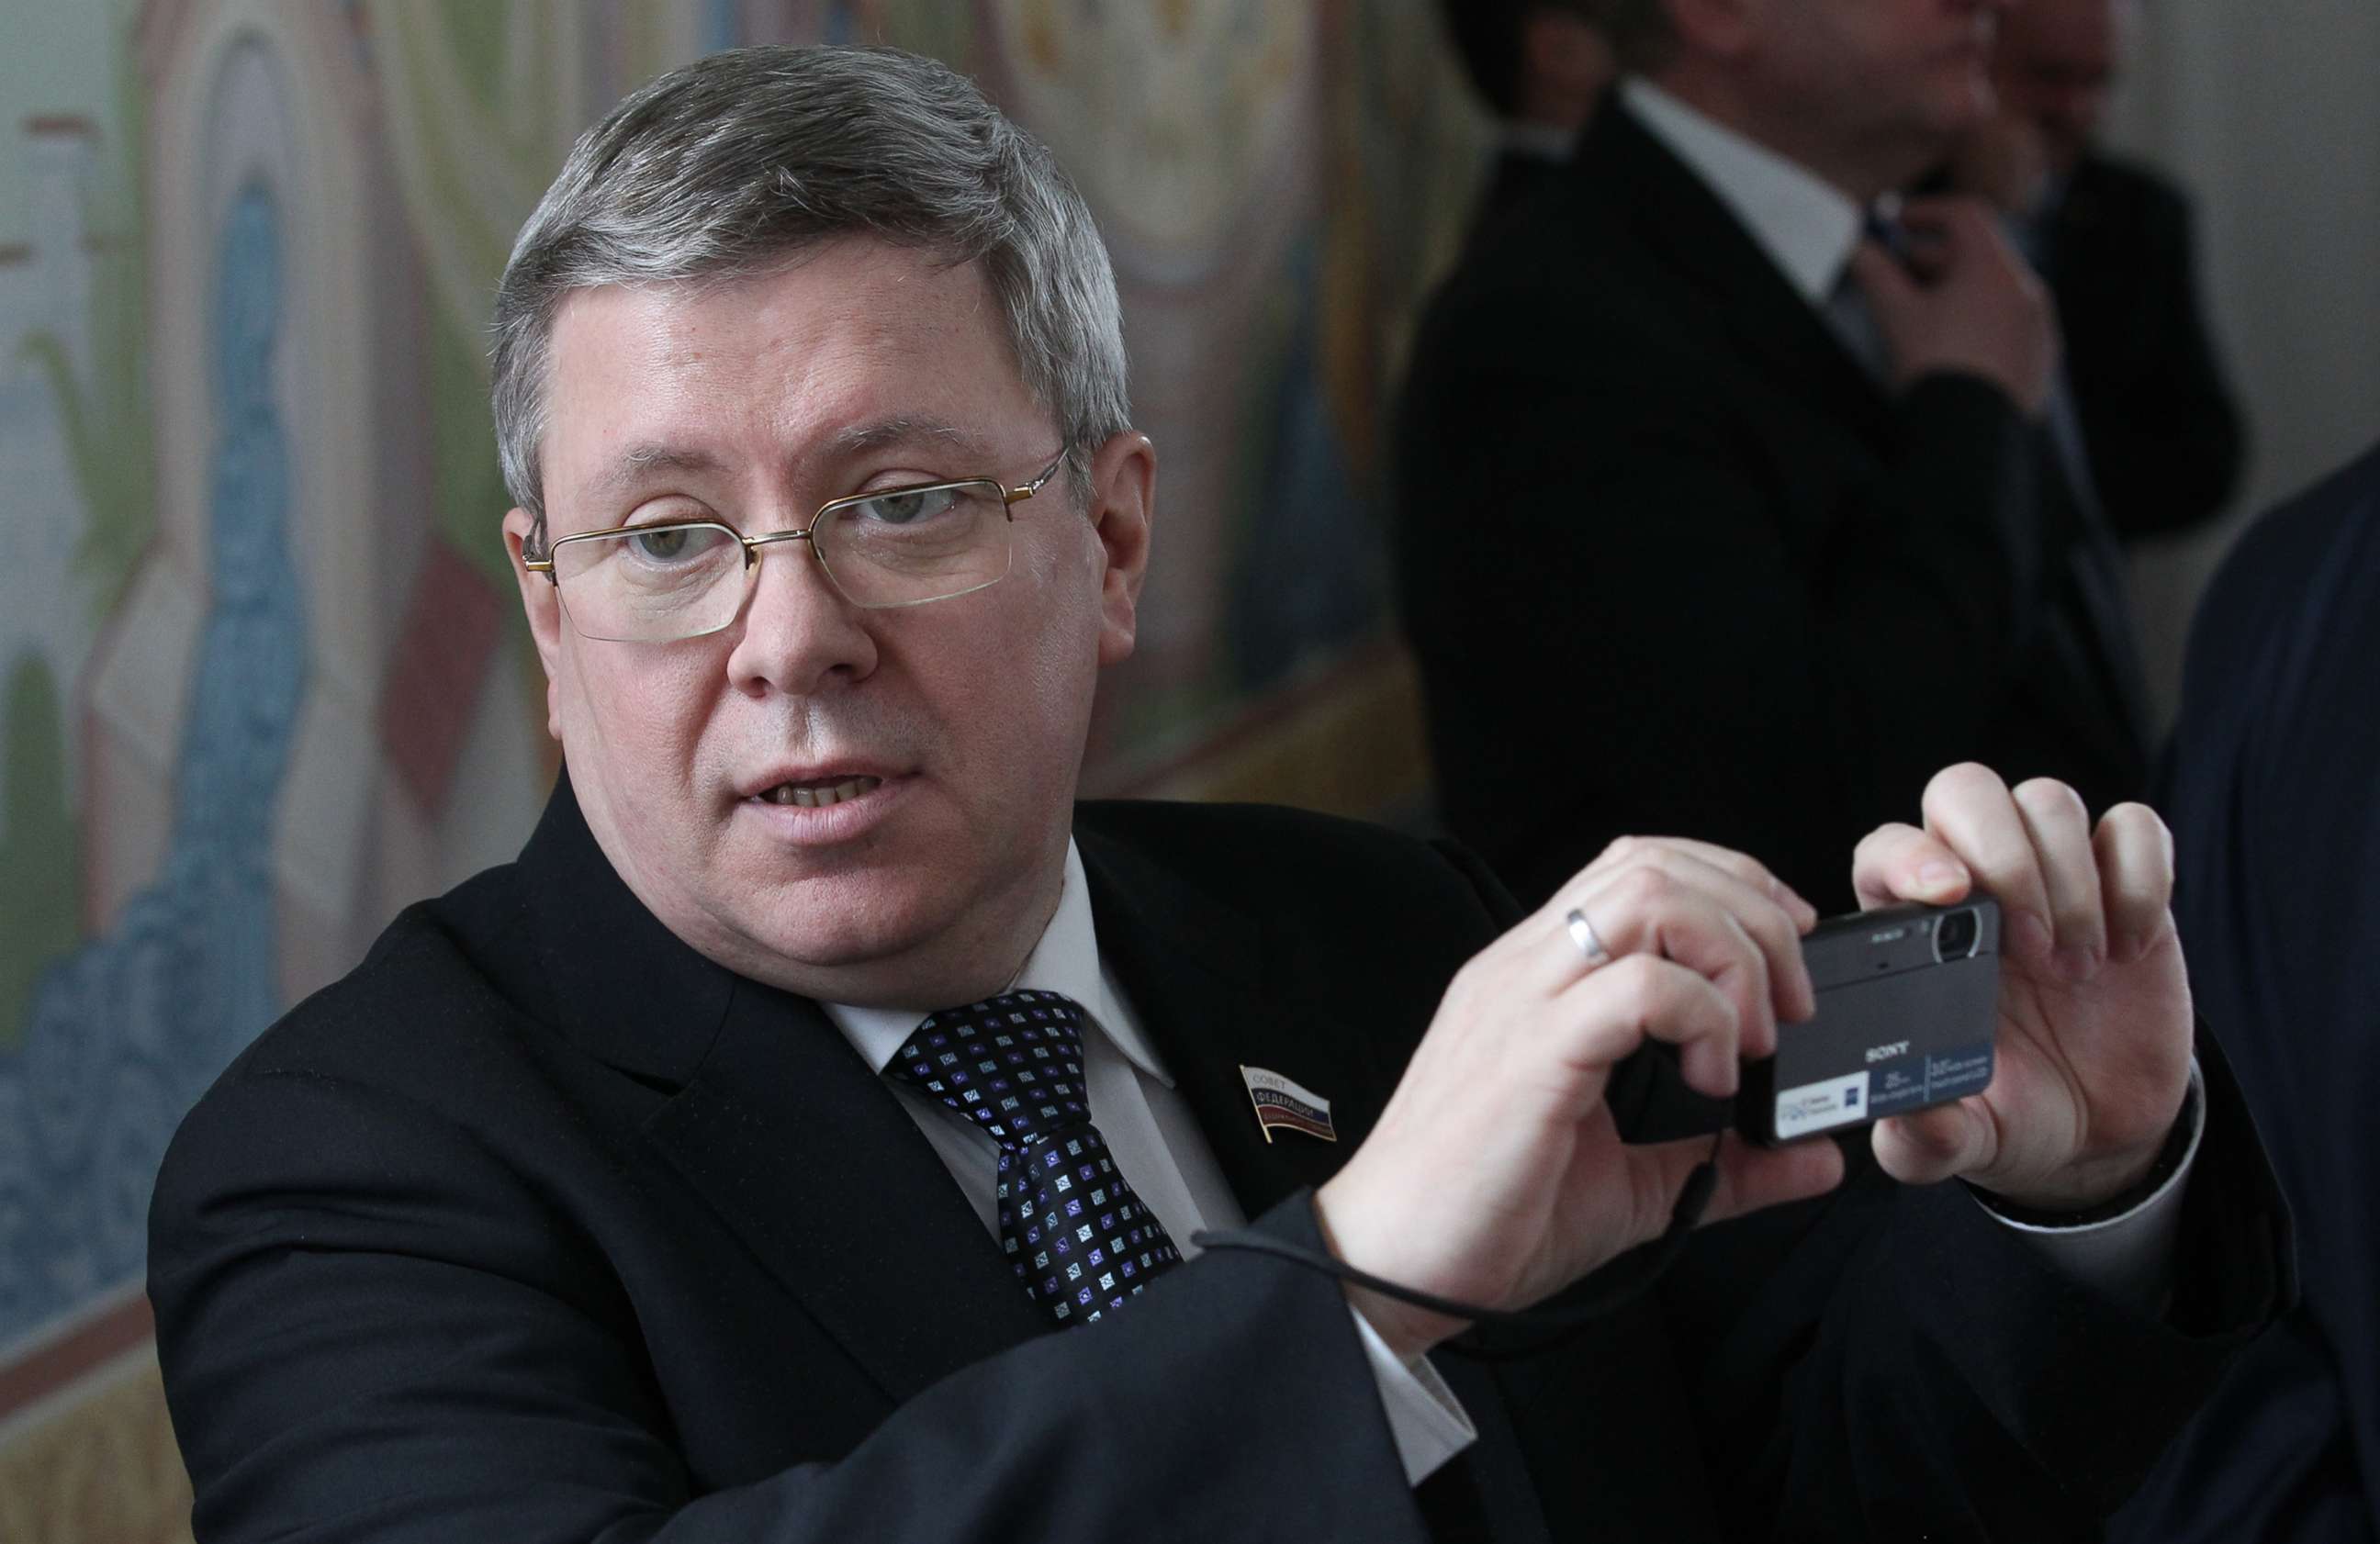 PHOTO: Russian Council of the Federation Deputy Chief Alexander Torshin is seen during a meeting, April, 3, 2012 in Maloyaroslavets, Russia.